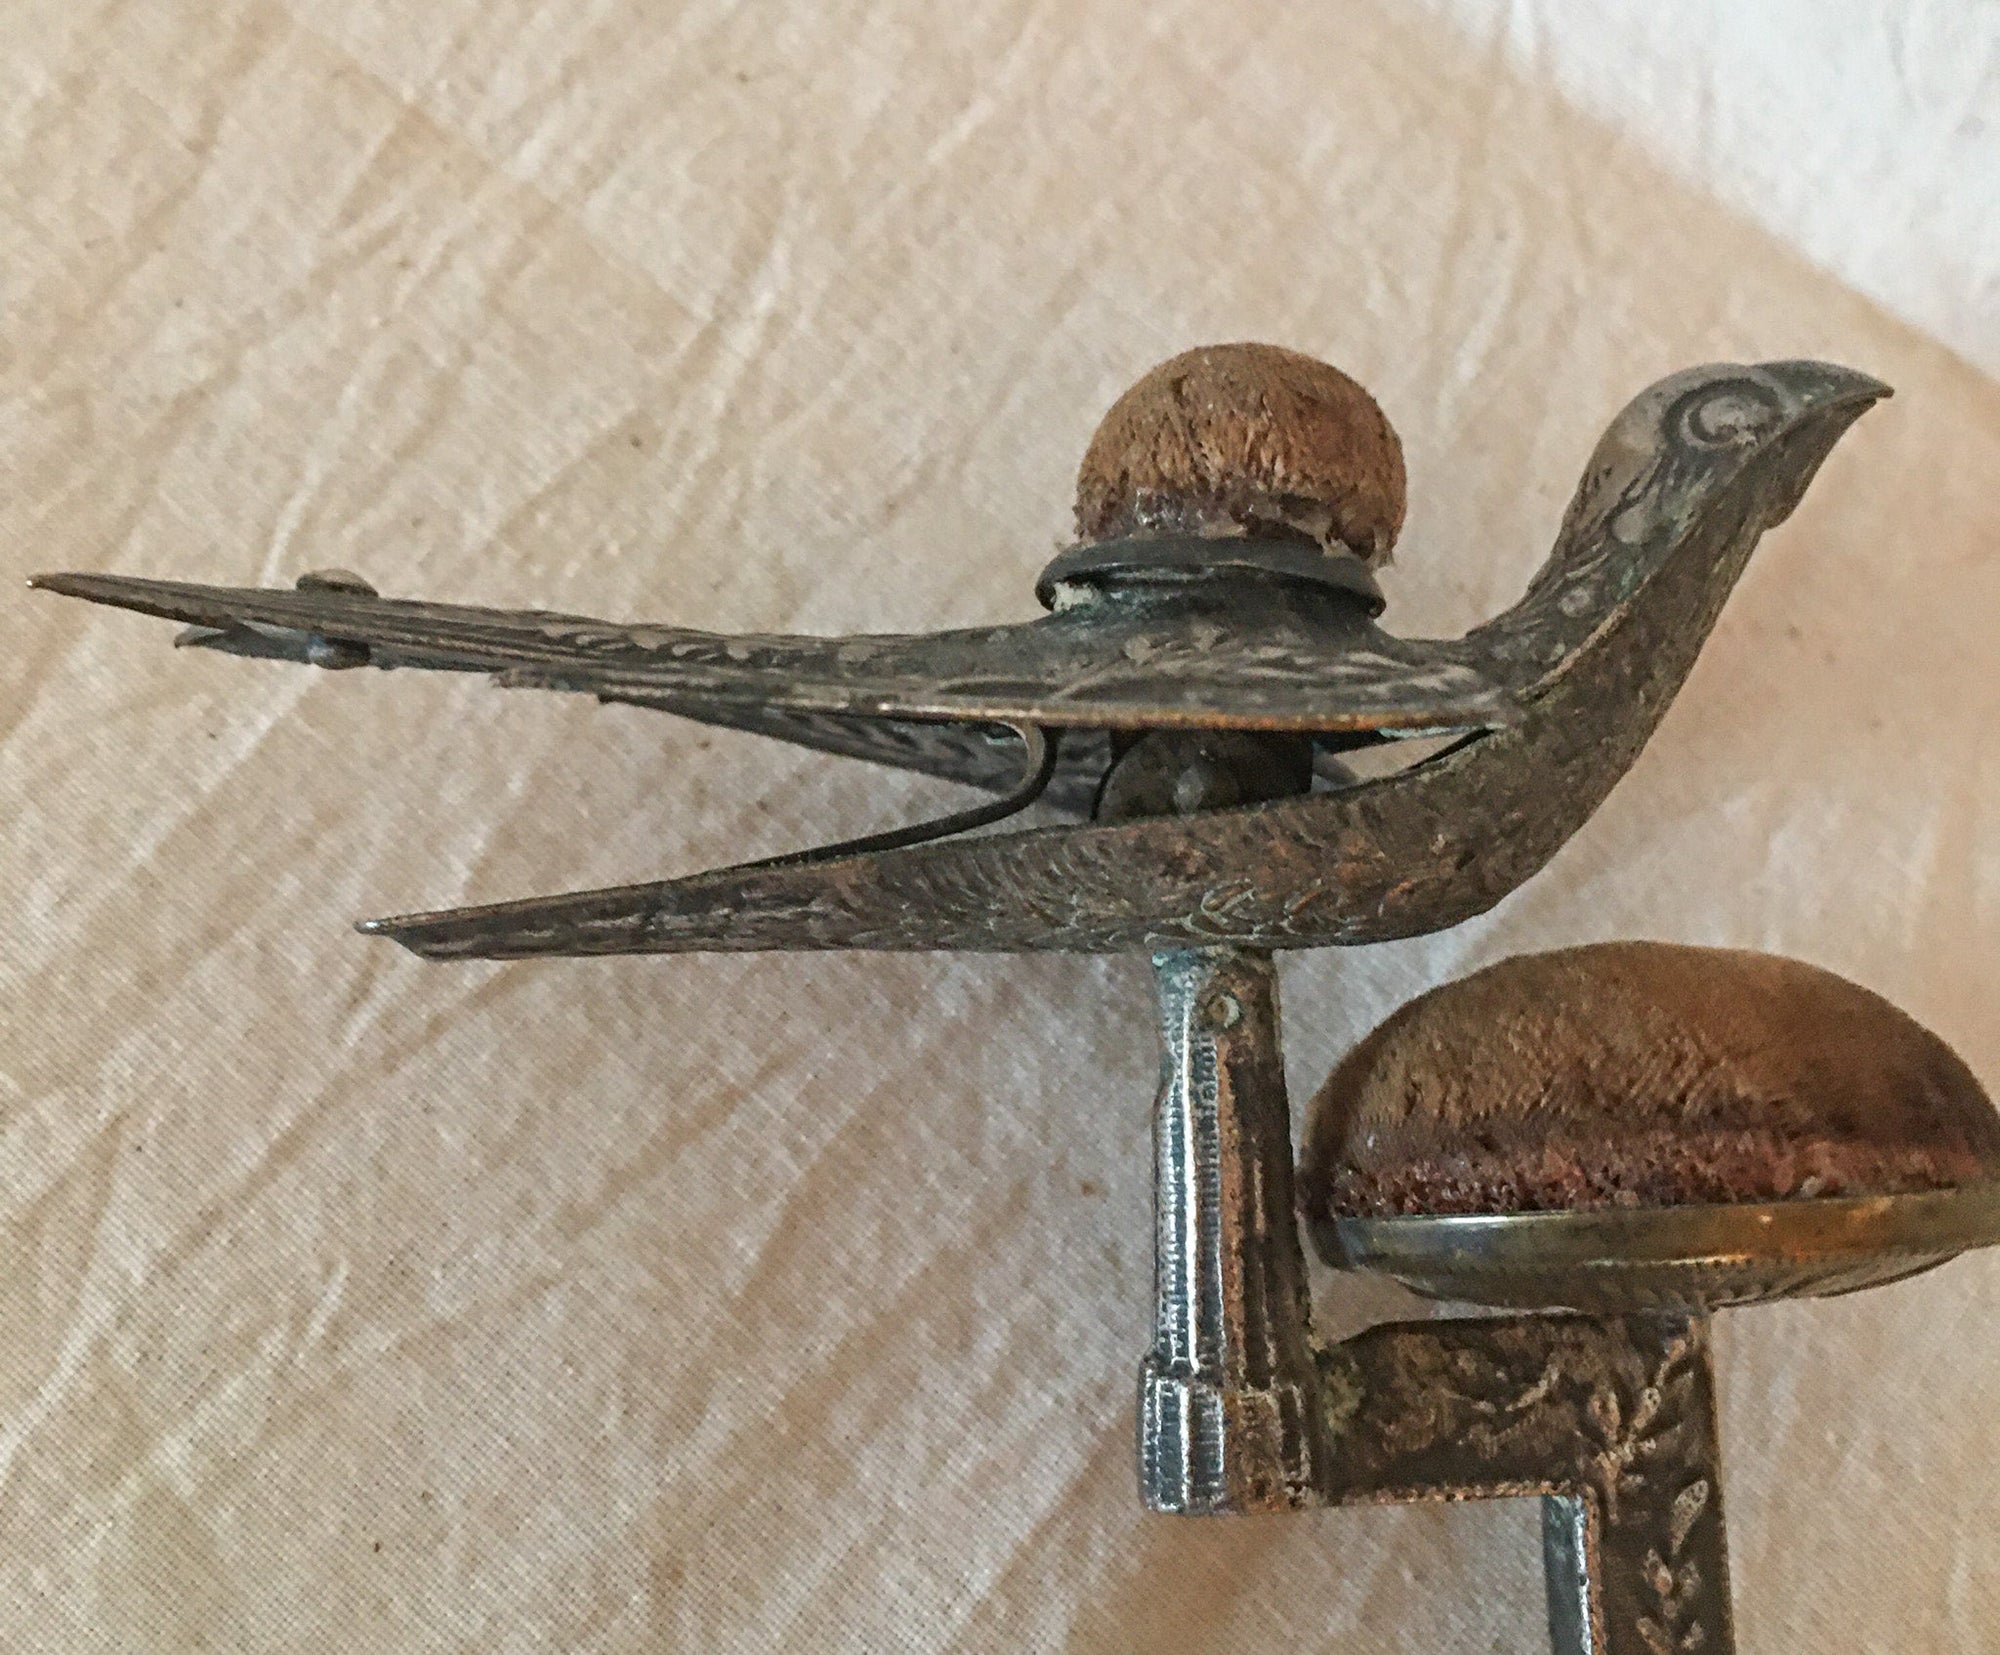 Victorian Sewing Bird, Patented Feb 15, 1853